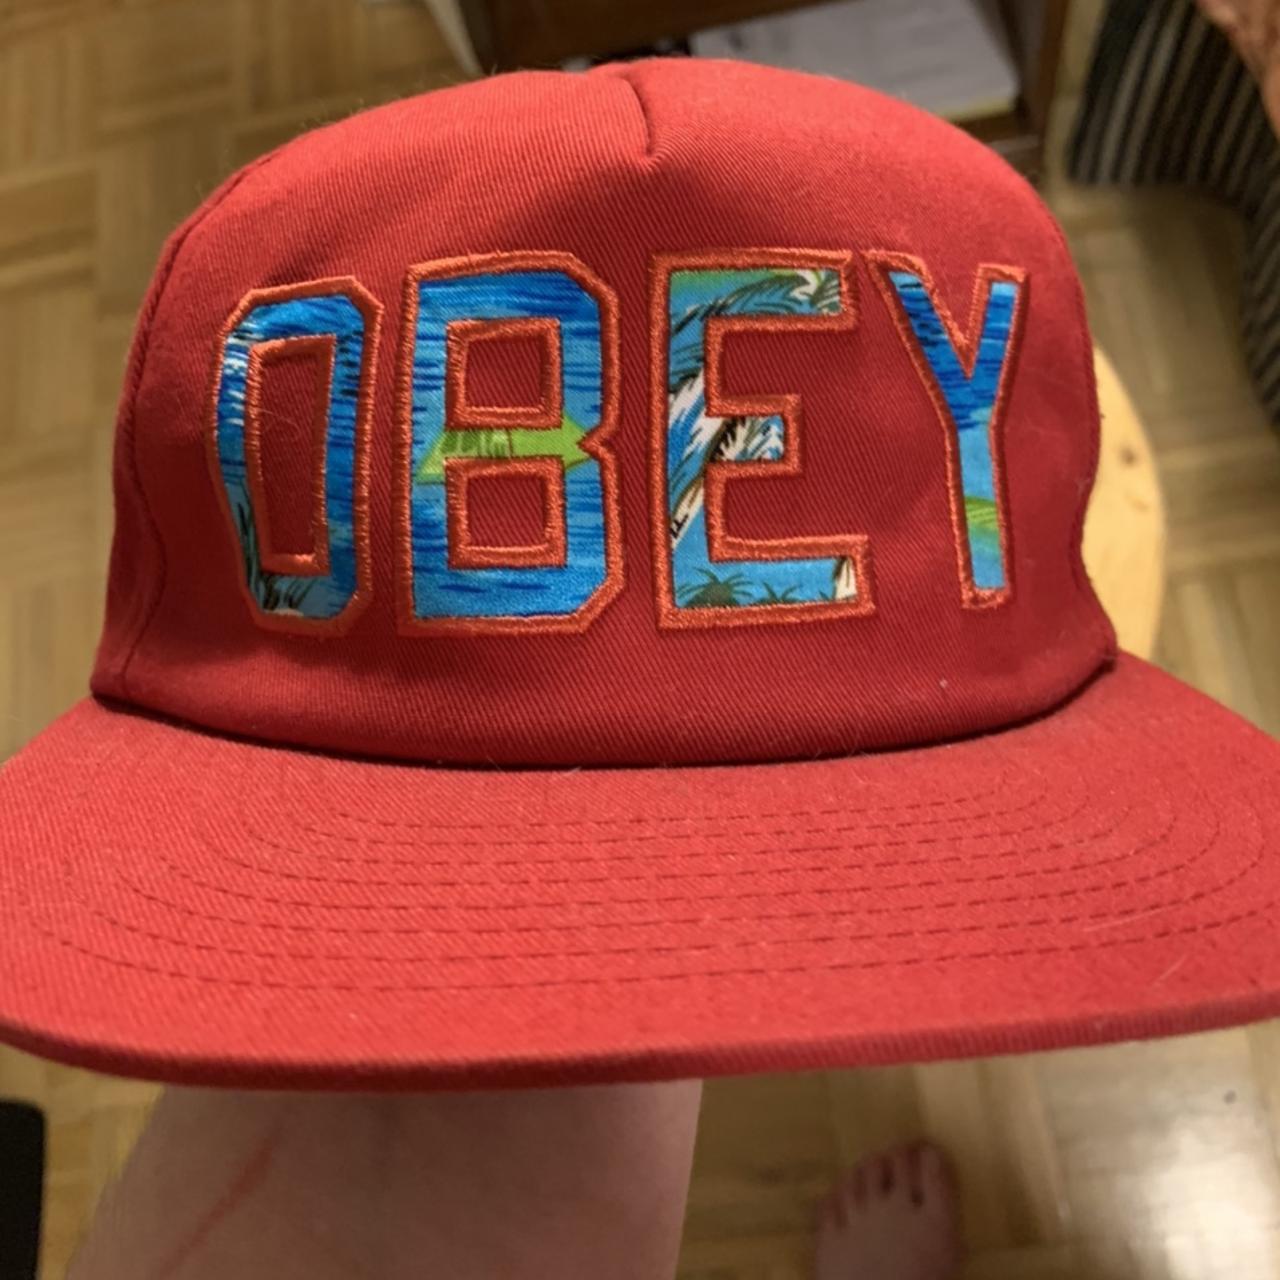 Obey Men's Red and Blue Hat